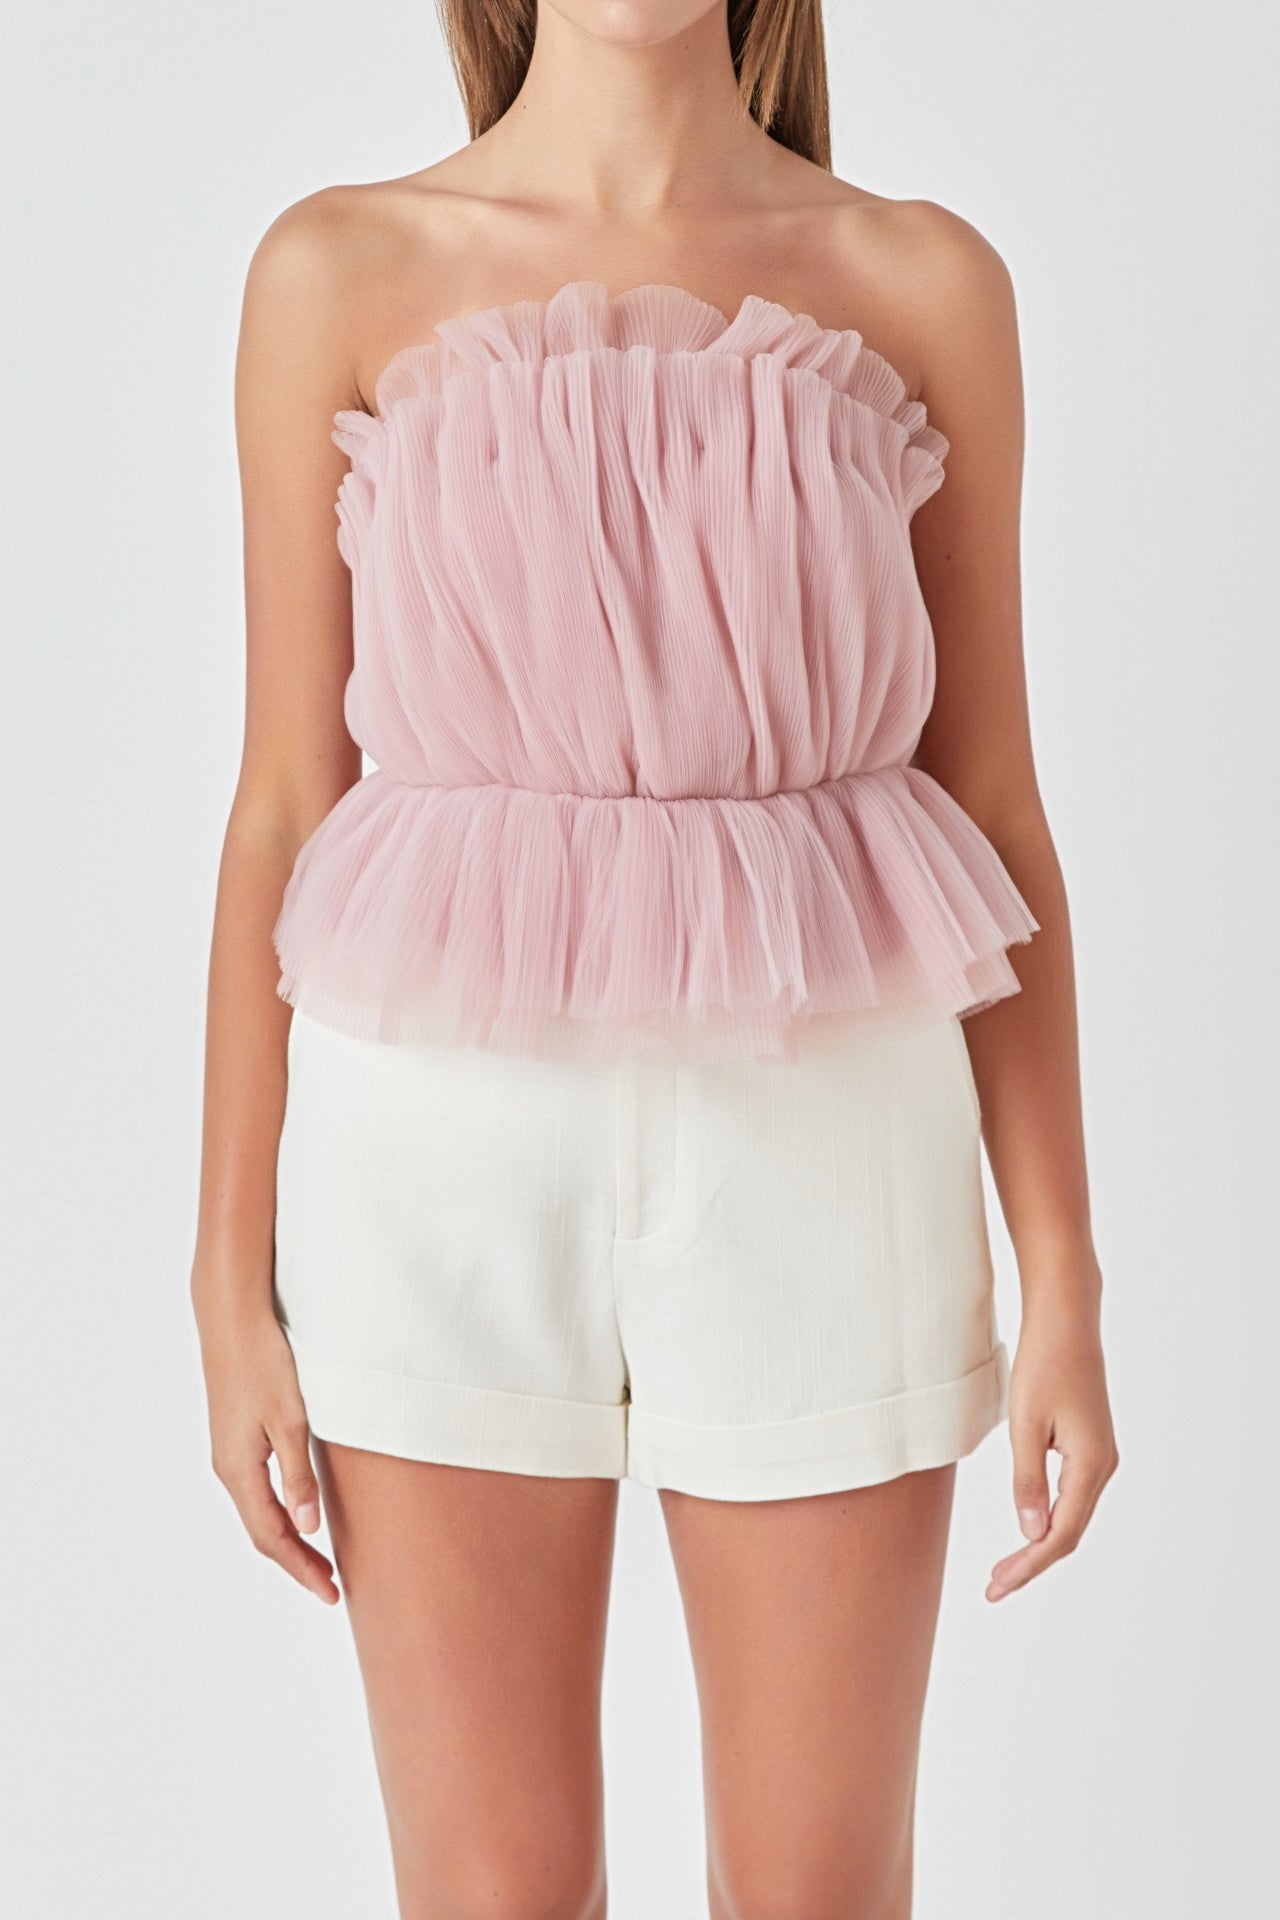 ENDLESS ROSE - Strapless Tulle Peplum Top - TOPS available at Objectrare